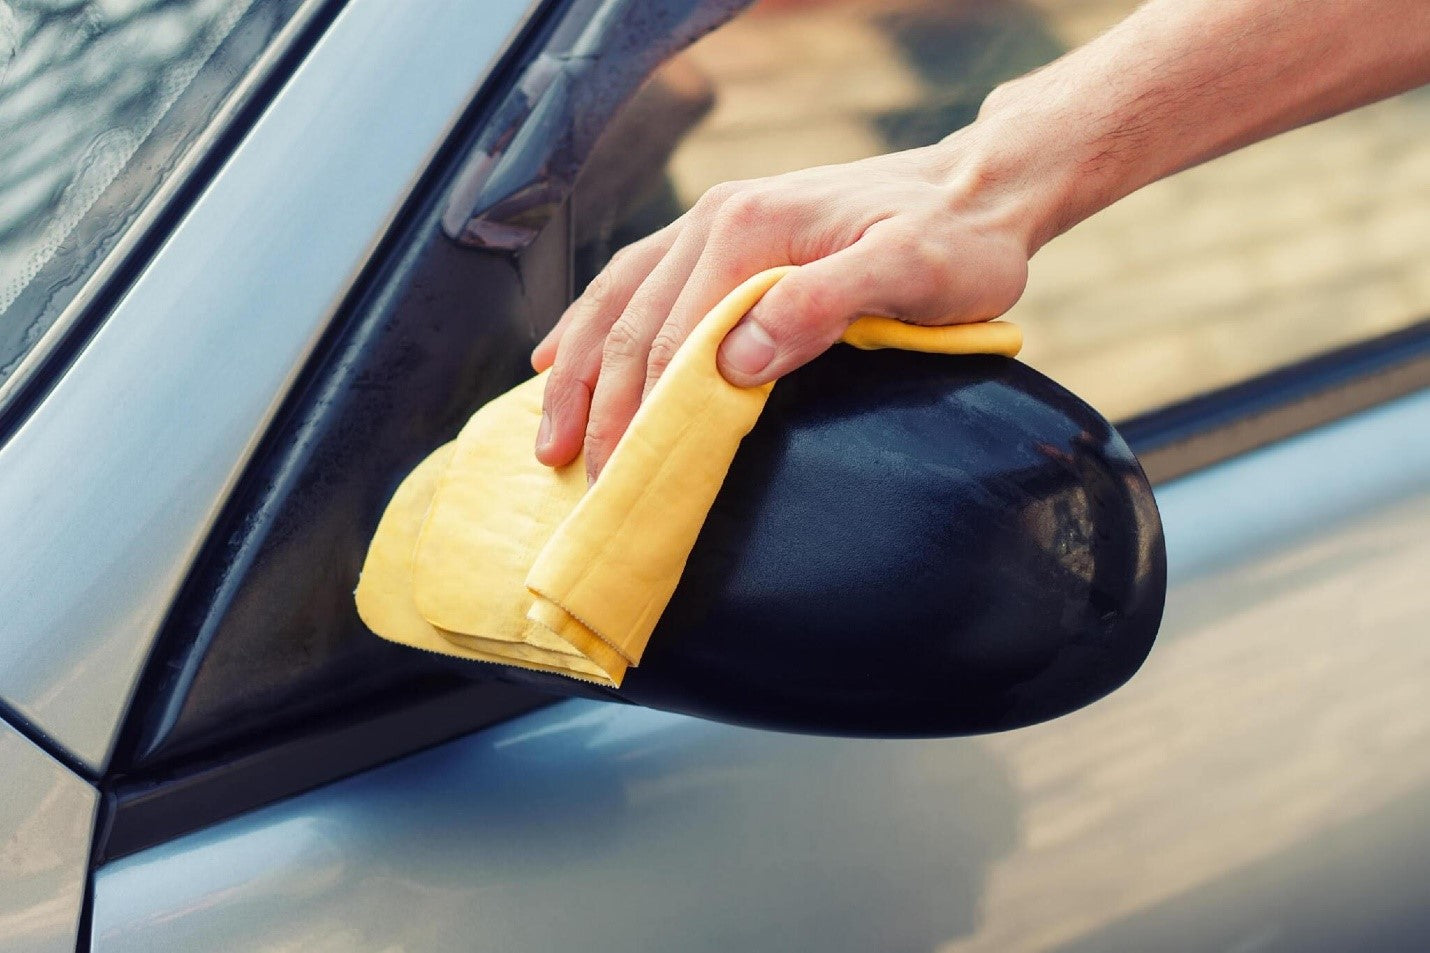 waterless car wash. Men's hand with yellow cloth cleaning car photo with toning carcarez